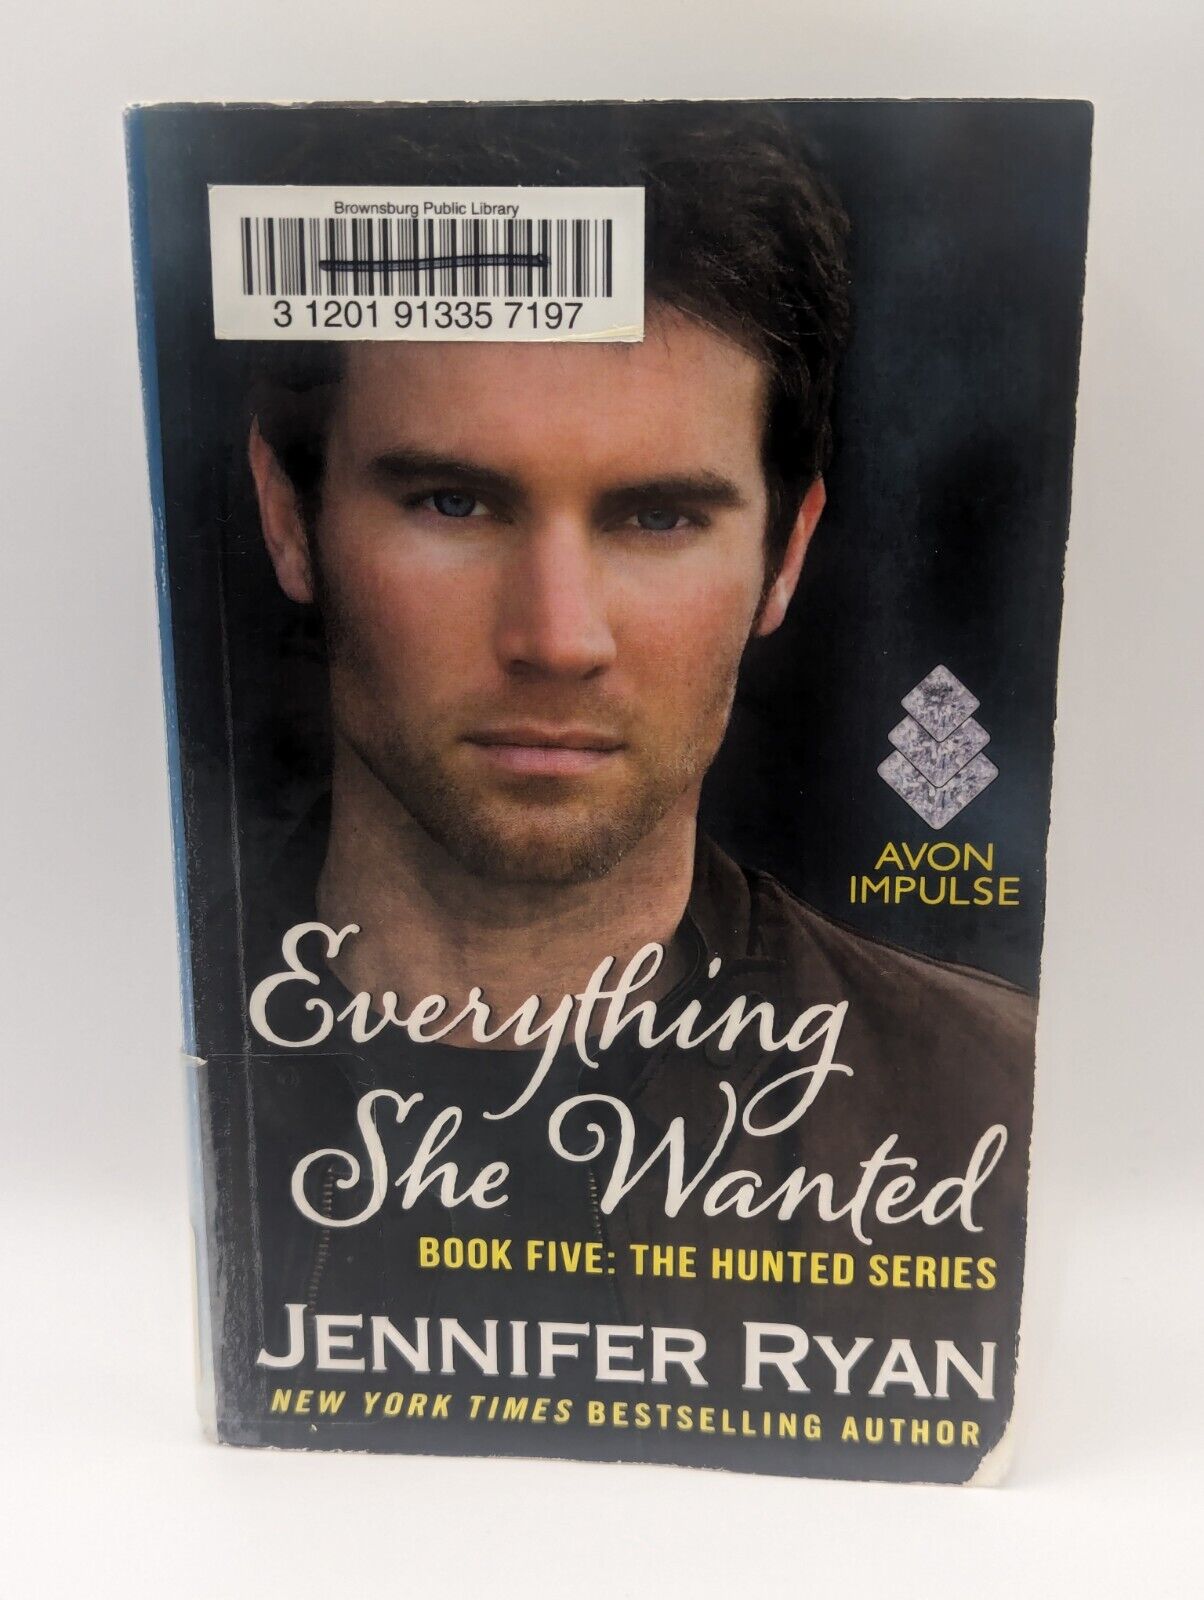 Saved By The Rancher The Hunted Series Complete Set  1-5 Jennifer Ryan Novel Lot